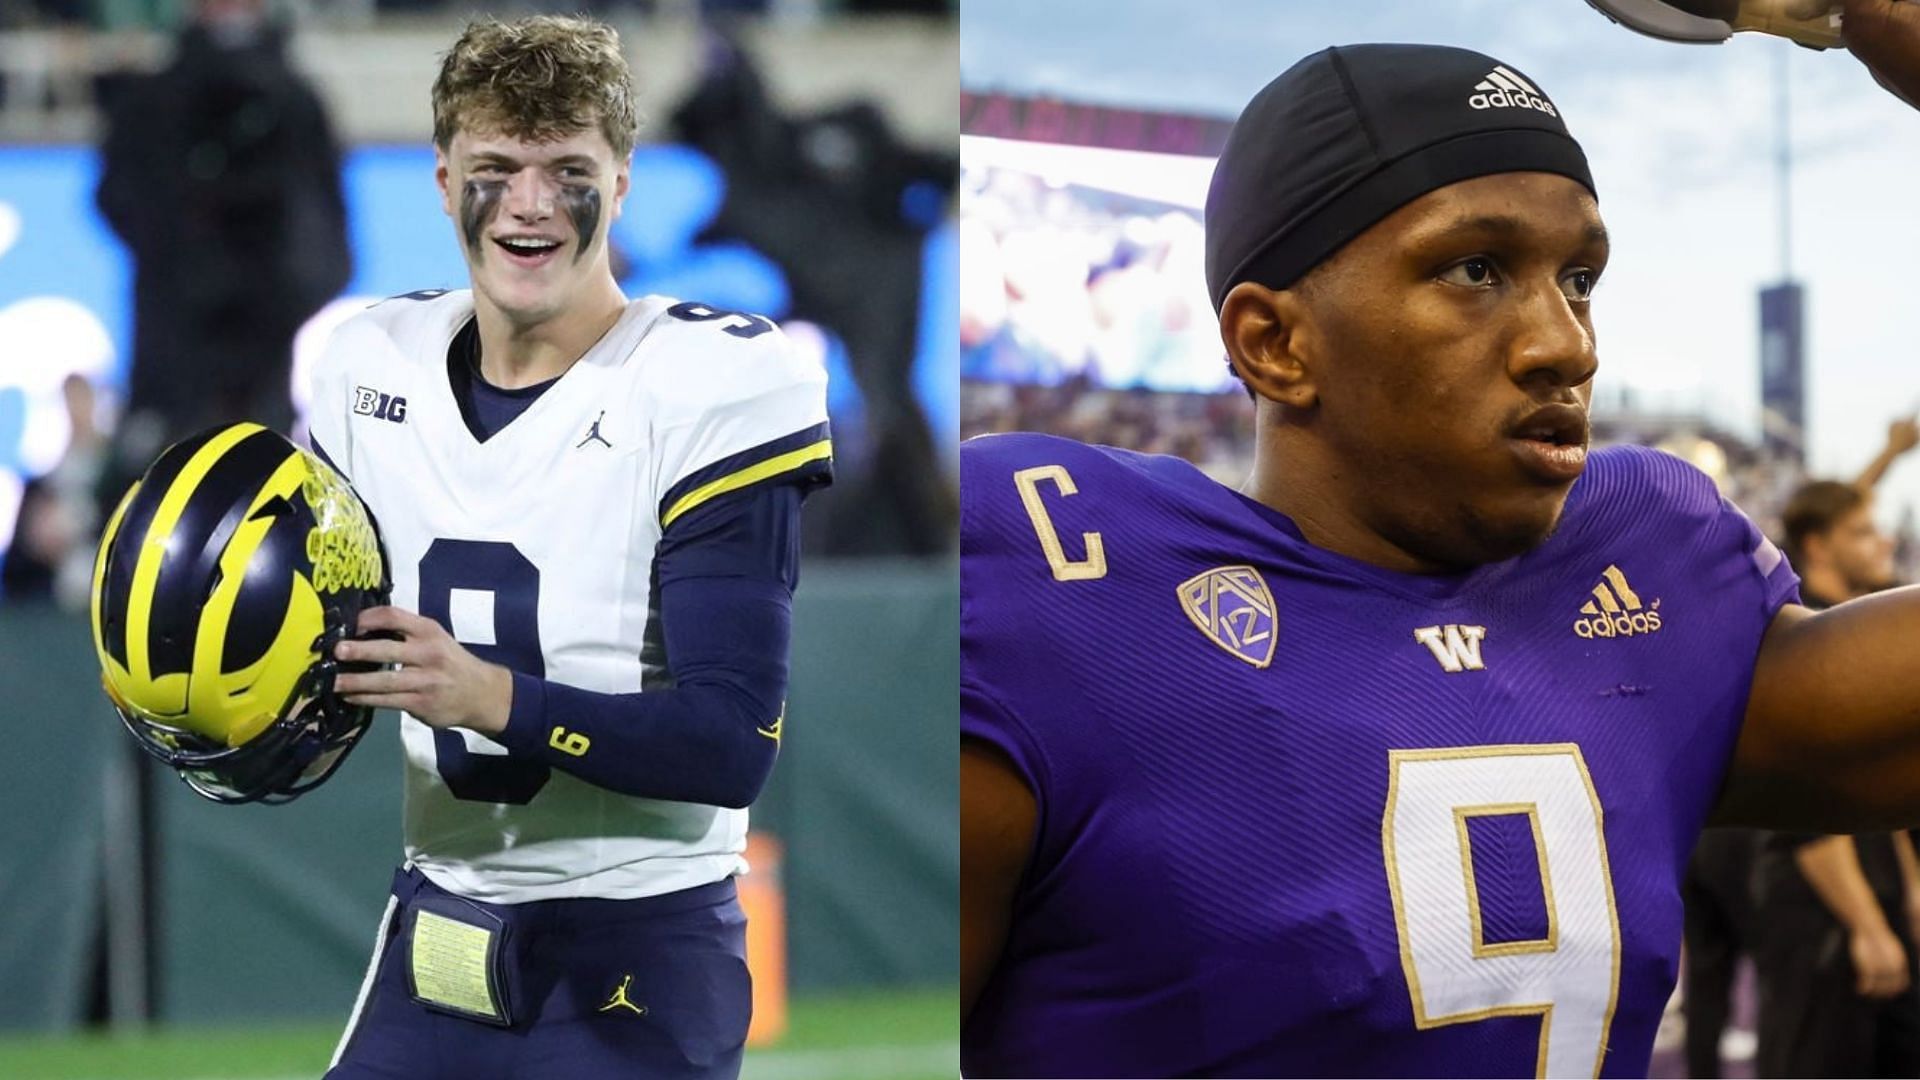 How to watch CFP national championship without cable? Michigan vs Washington live stream options explored